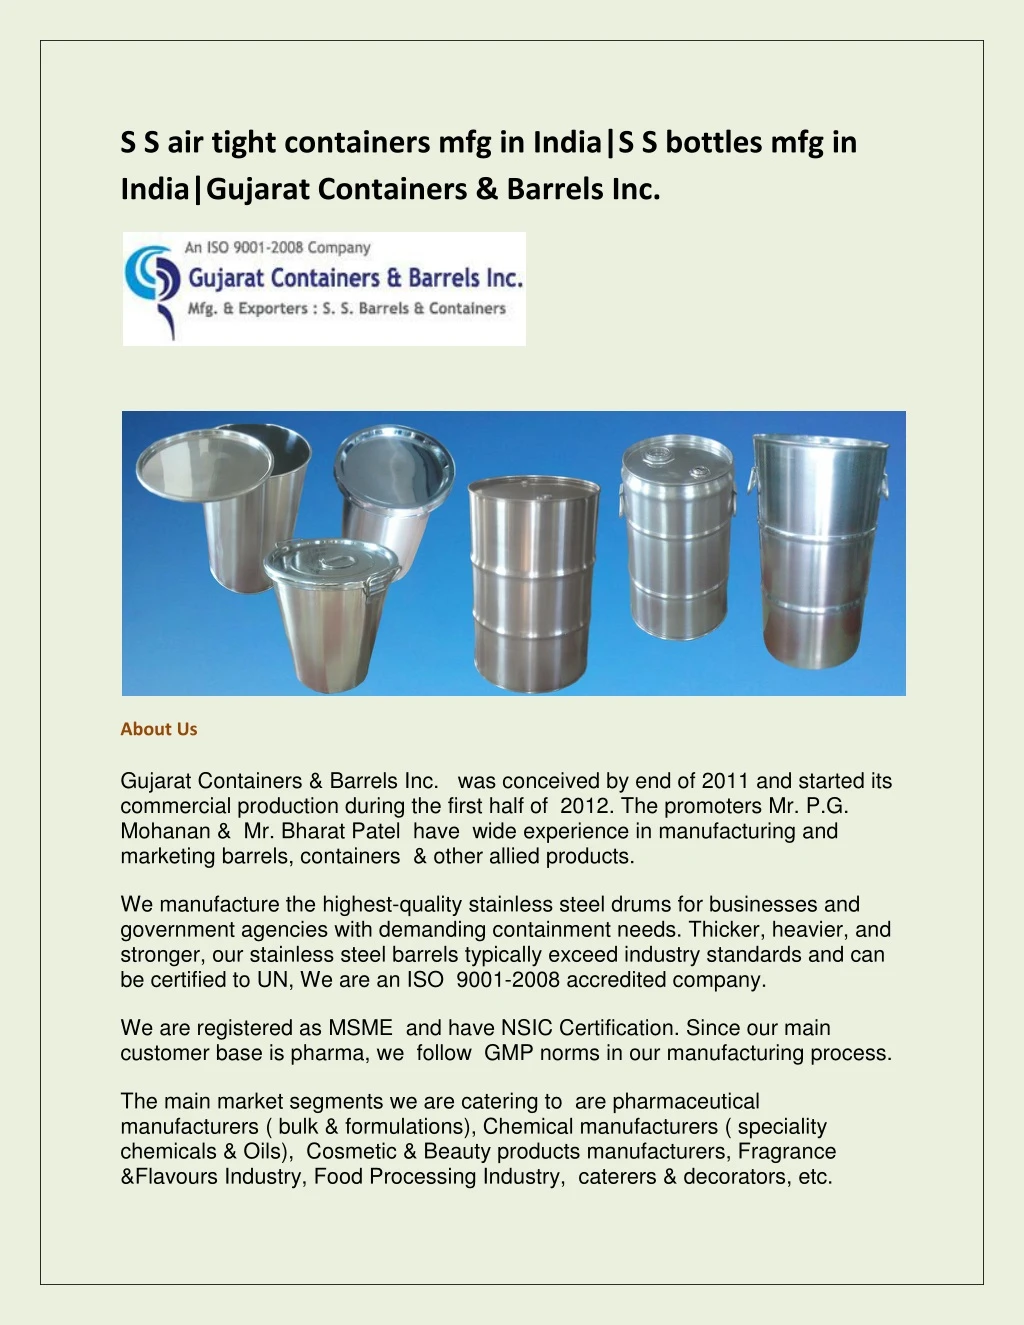 s s air tight containers mfg in india s s bottles